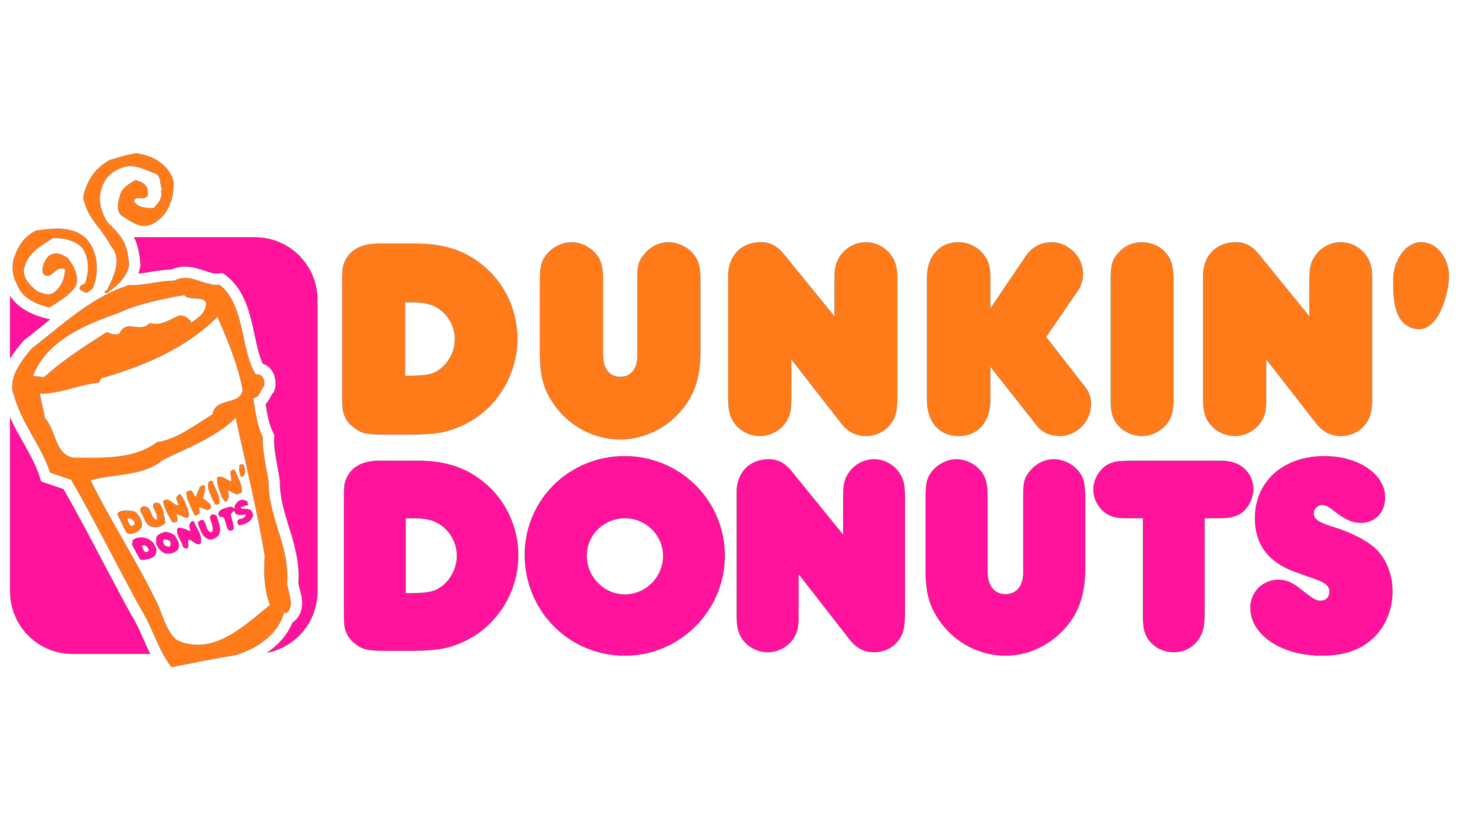 Dunkin donuts sign 2002 2007